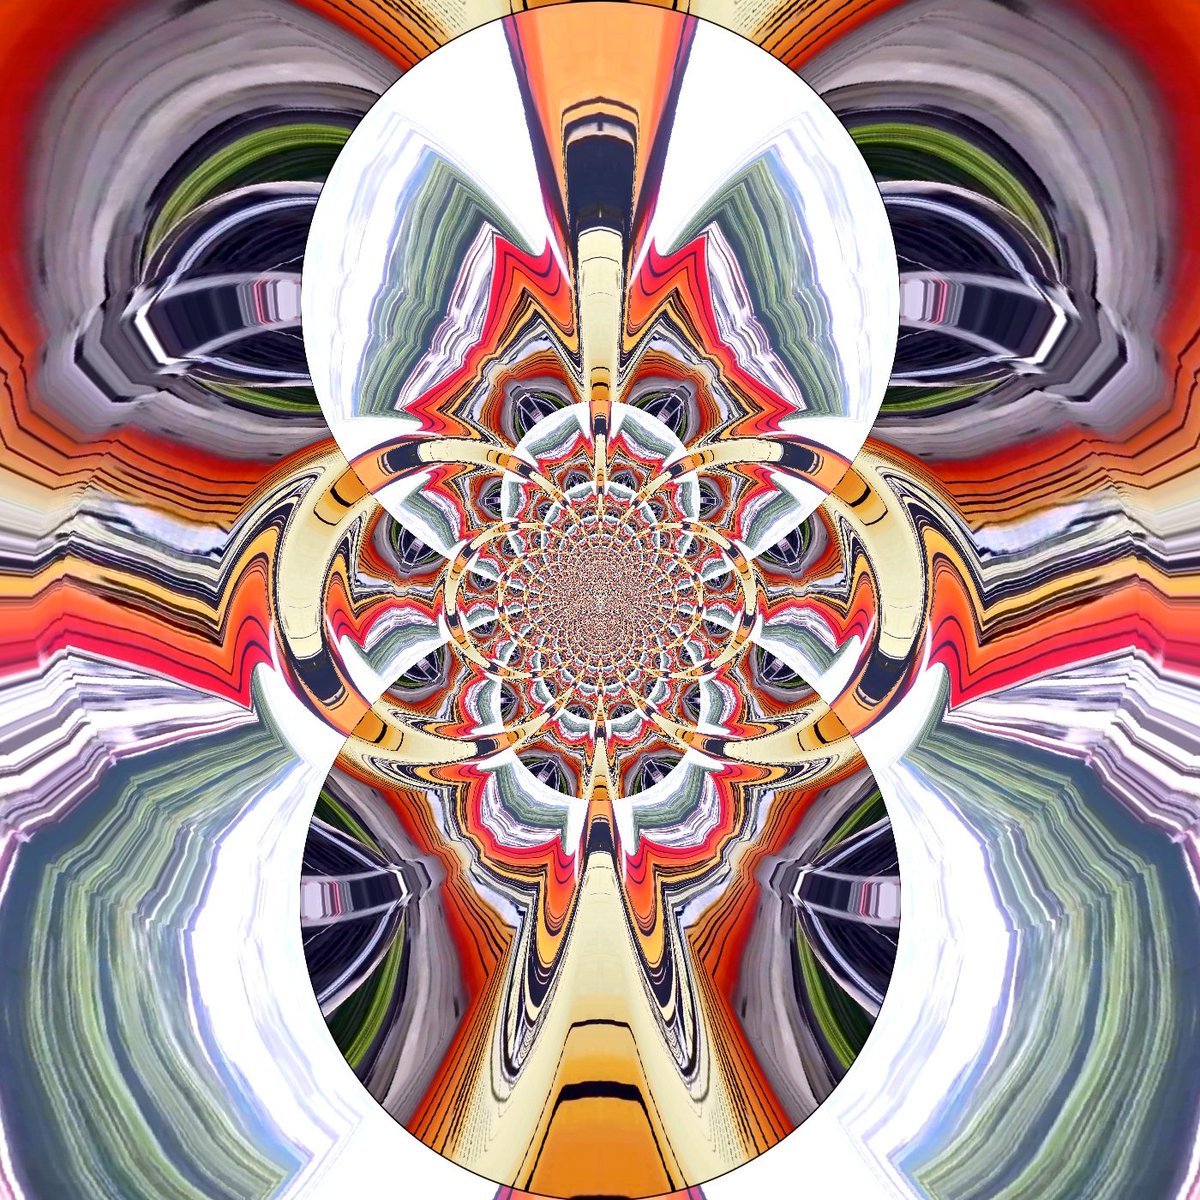 5th dimension

Created with the #MirrorMania app from usartwork 
Follow usartwork on Instagram for more pics. 
#mirroreffect #digitalart  #algorithmicart #mathart #generativeart  #filtermania #imagefiltering #digitalimaging #imageprocessing